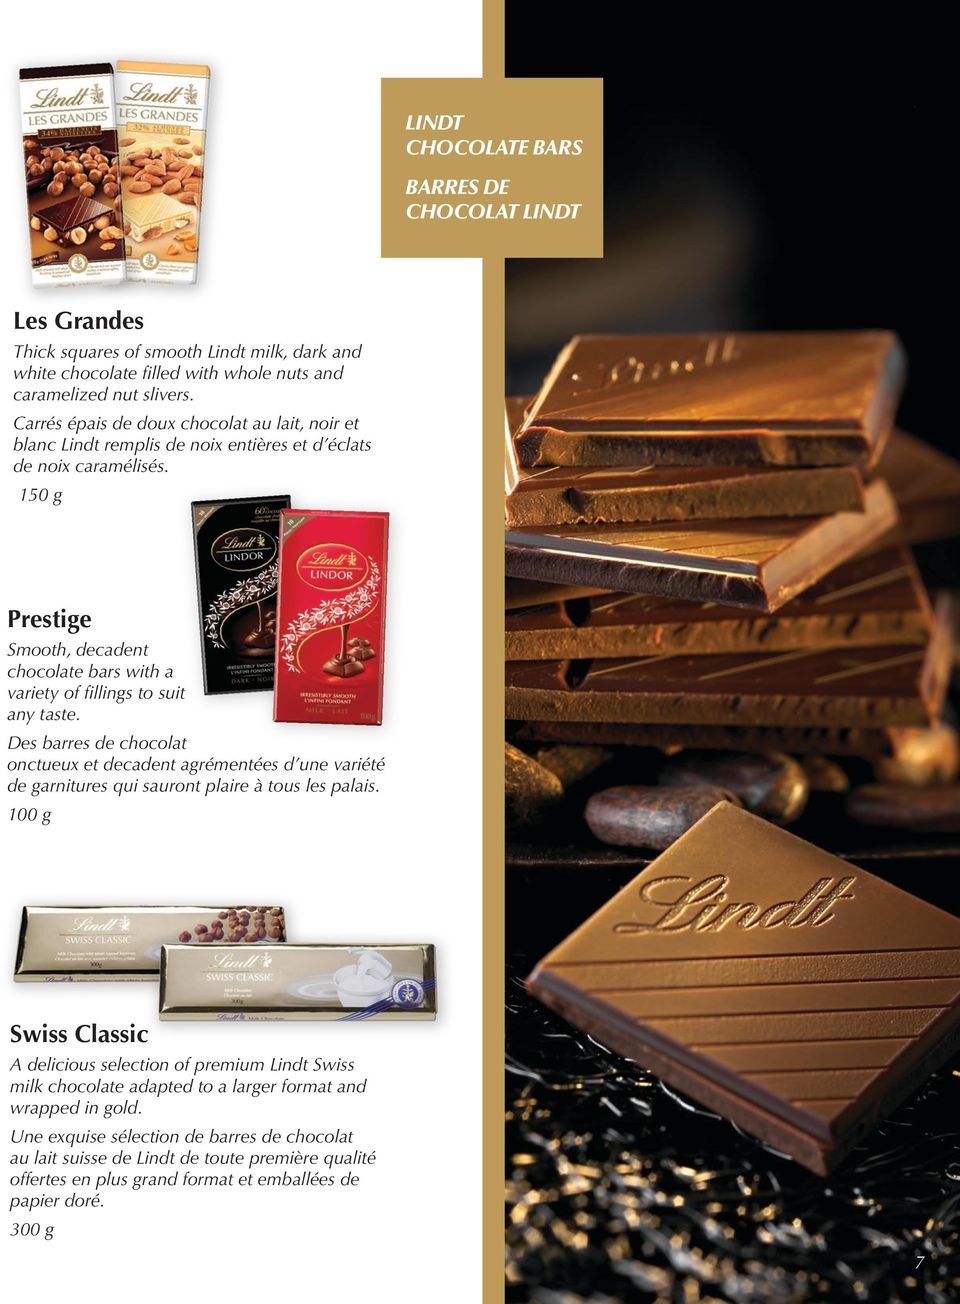 150 g Prestige Smooth, decadent chocolate bars with a variety of fillings to suit any taste.